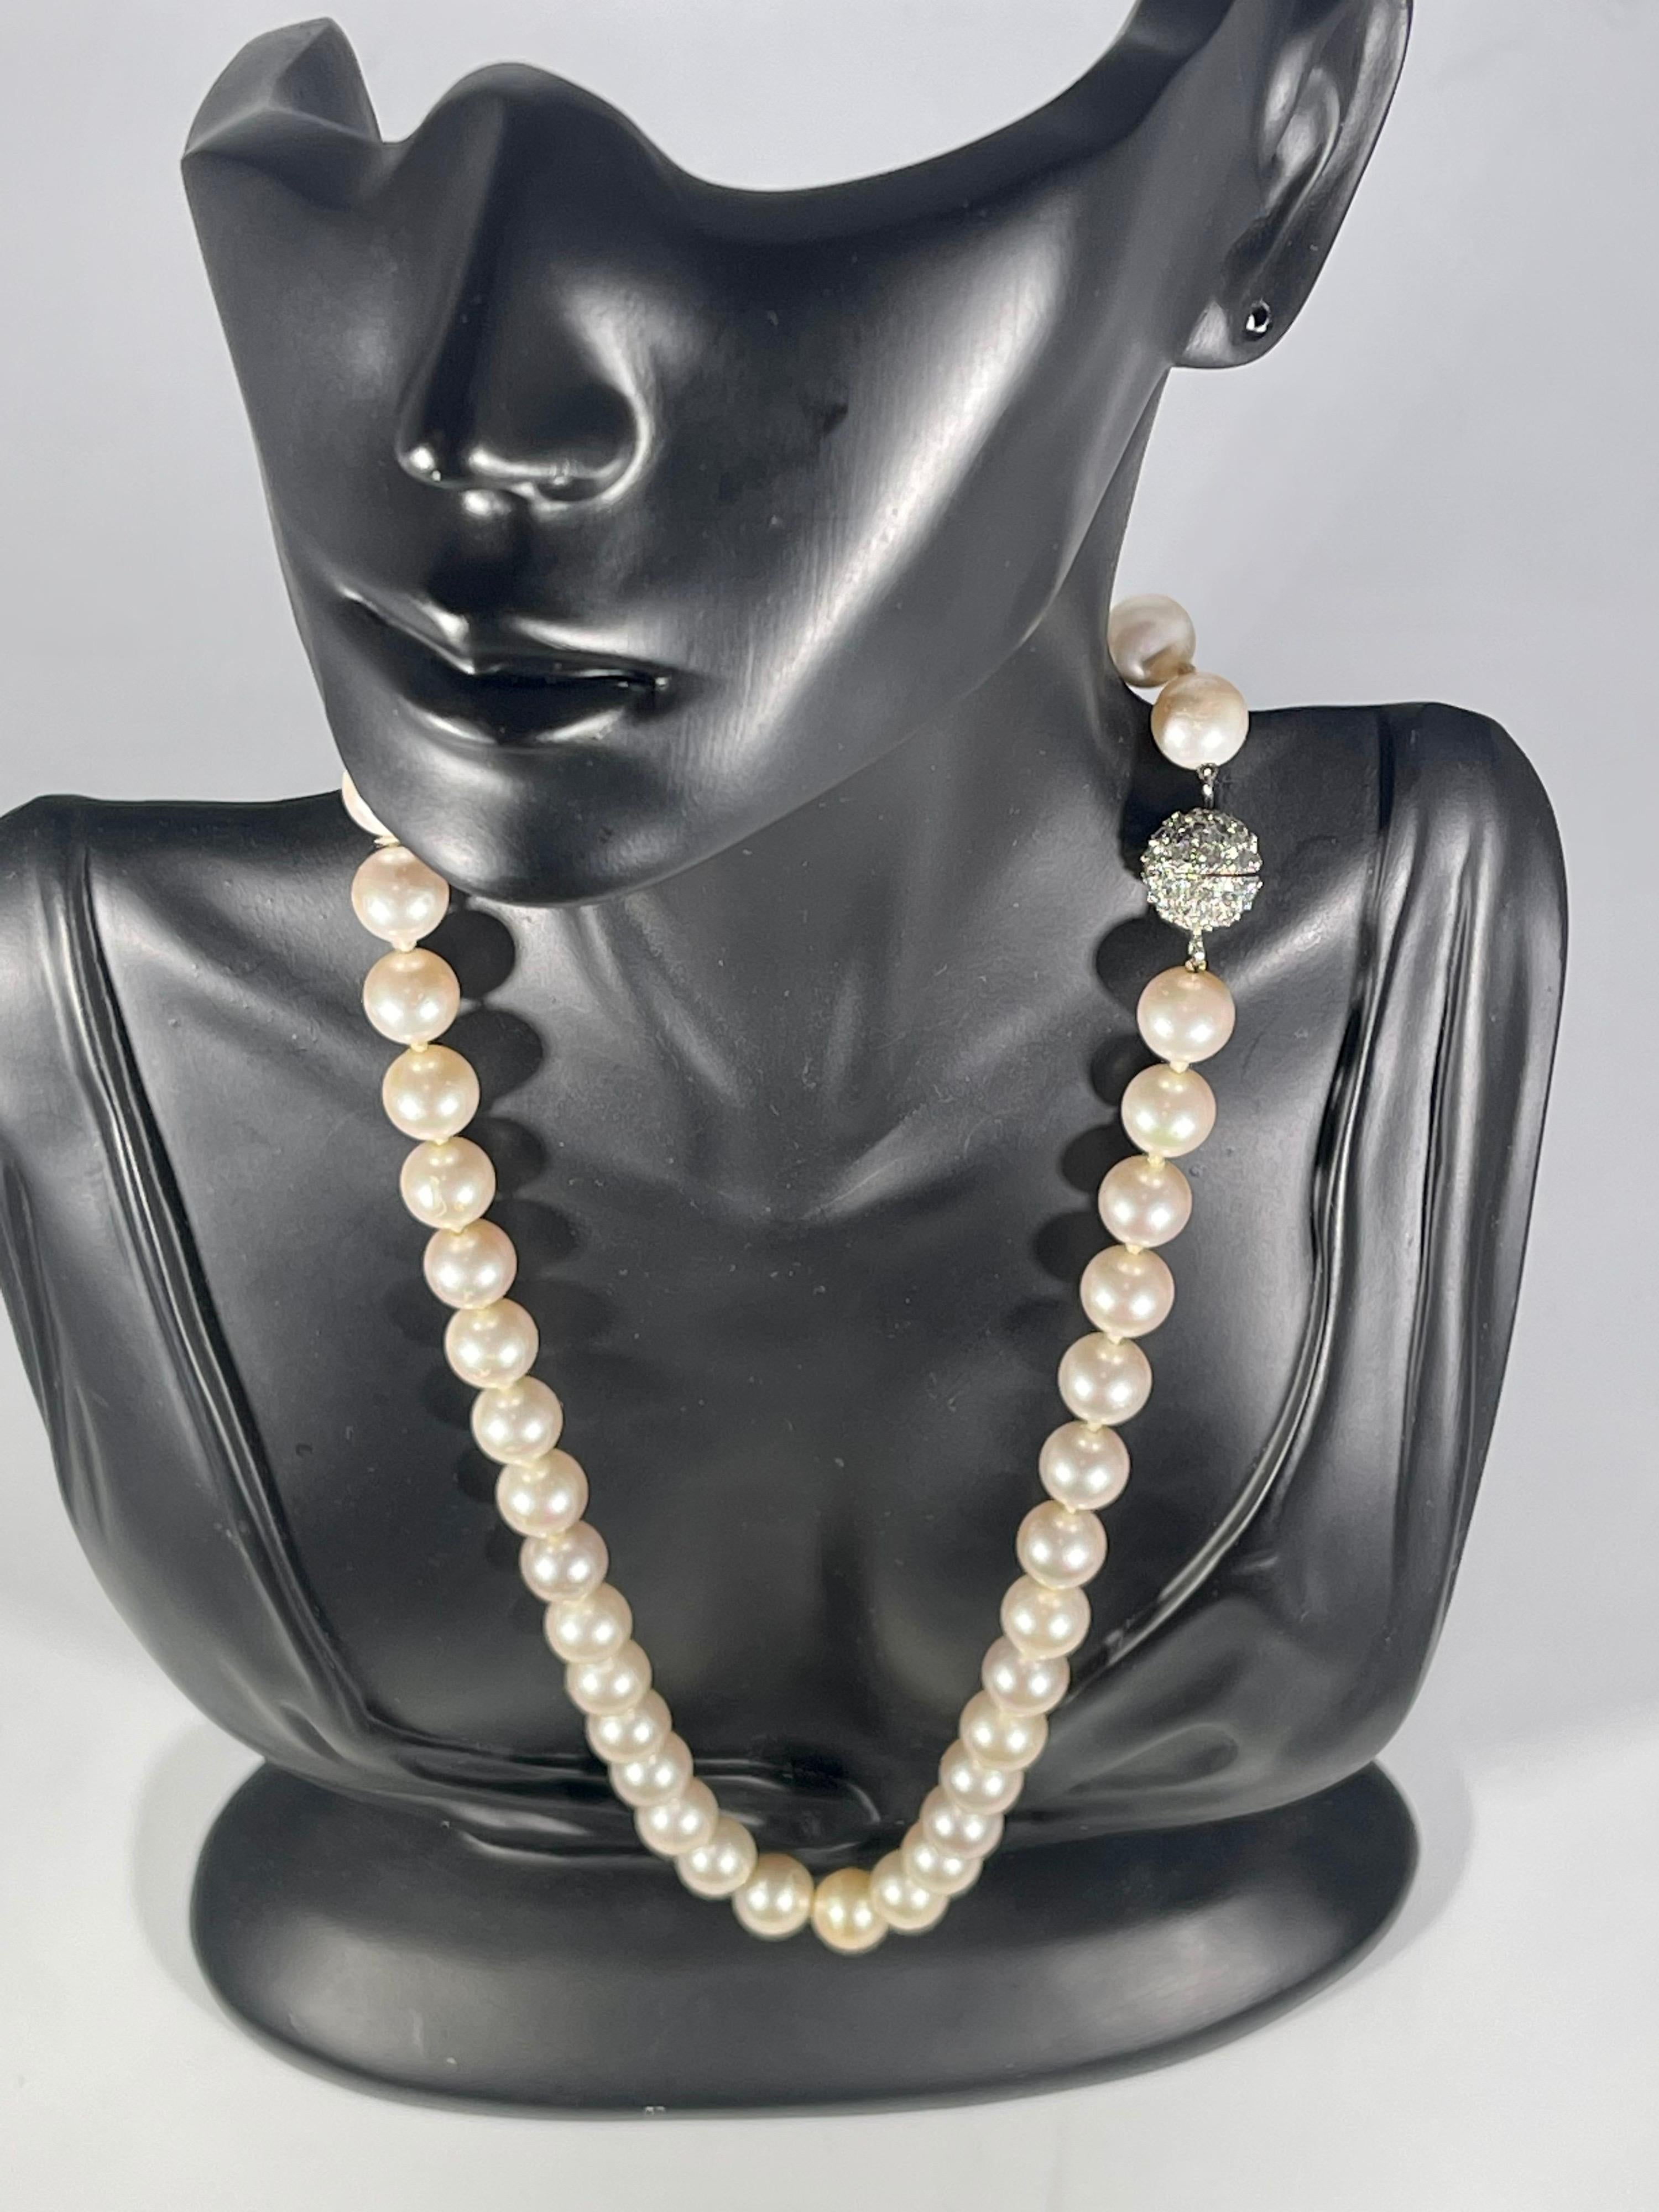 41 Round Akoya Pearls Strand Necklace Set in Metal Ball Clasp For Sale 8